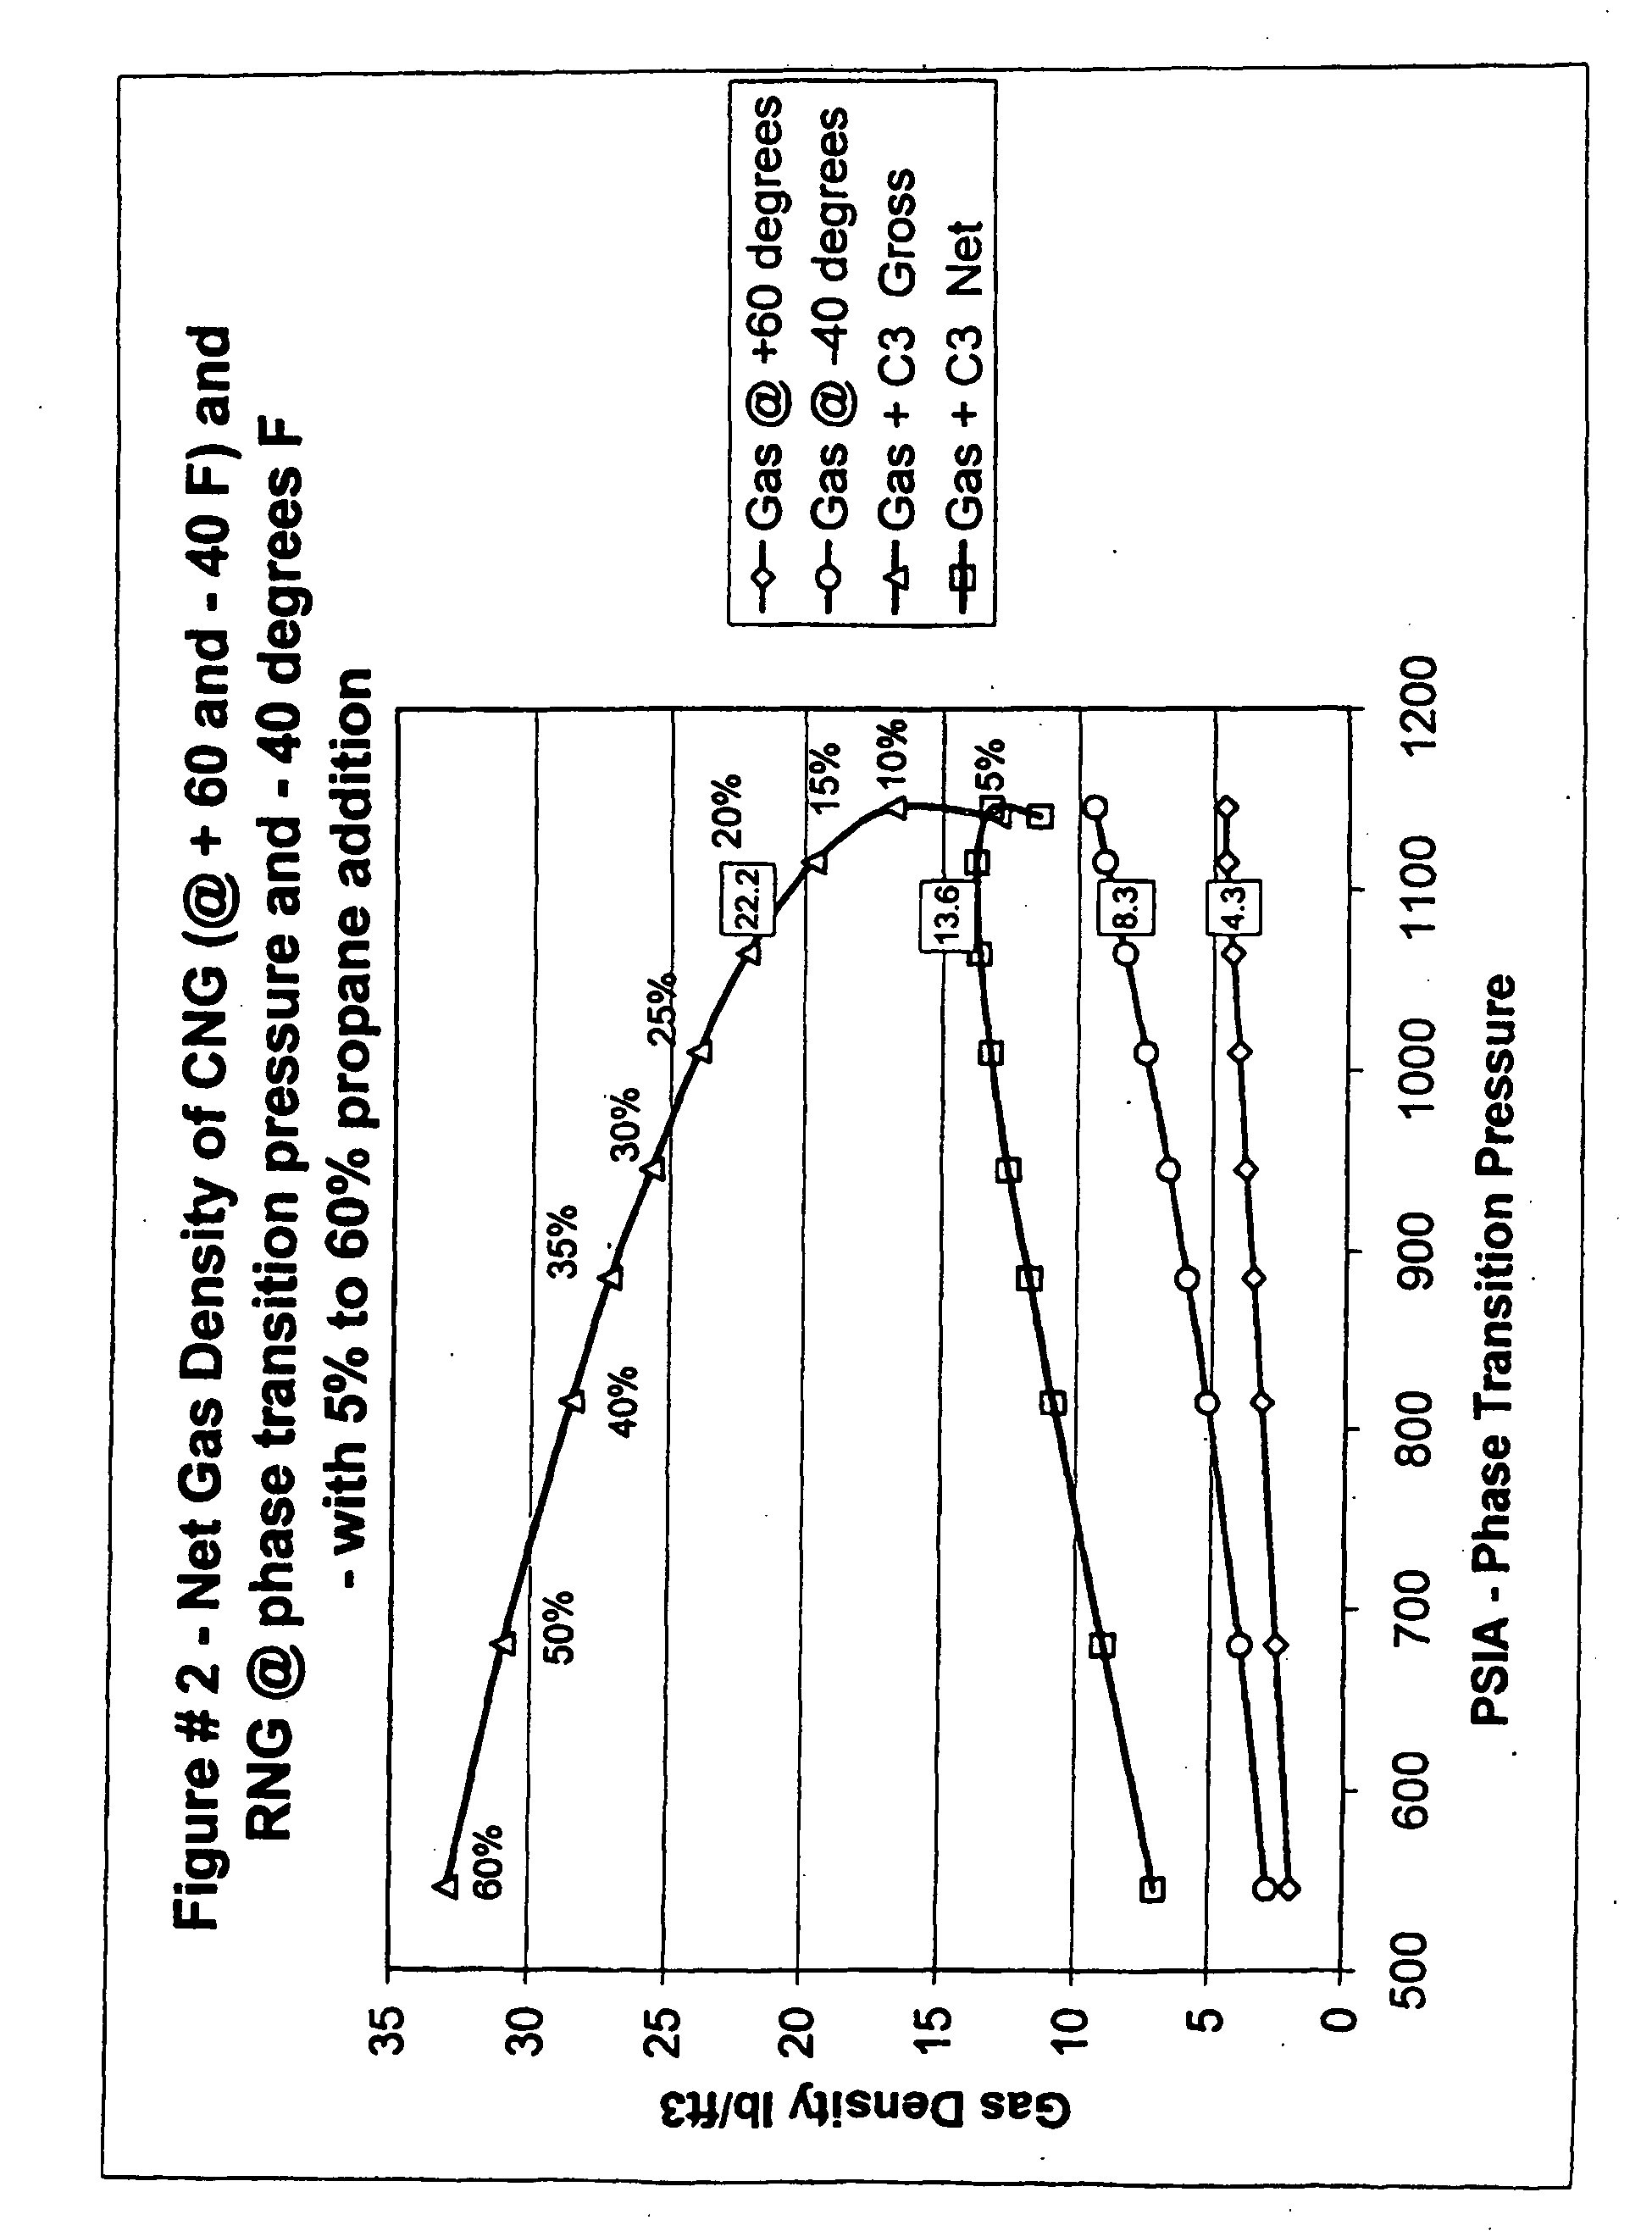 Method and substance for refrigerated natural gas transport